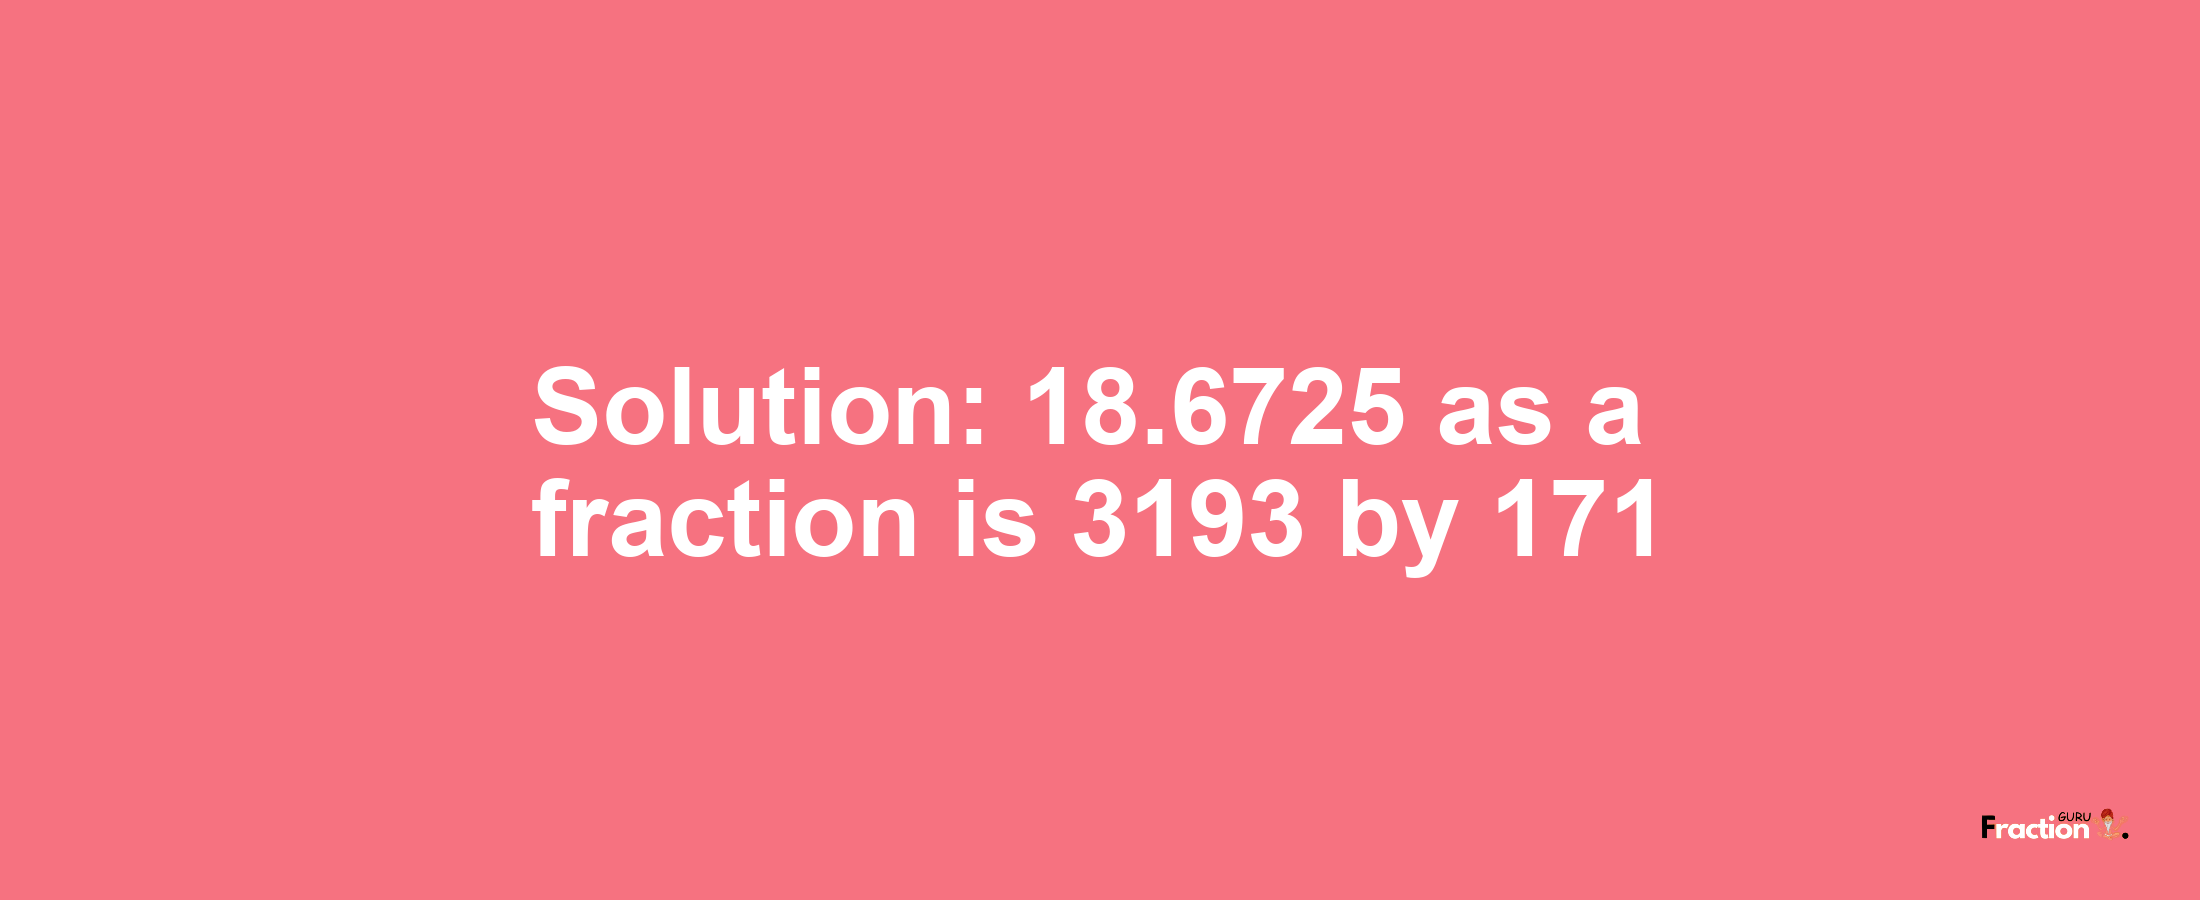 Solution:18.6725 as a fraction is 3193/171